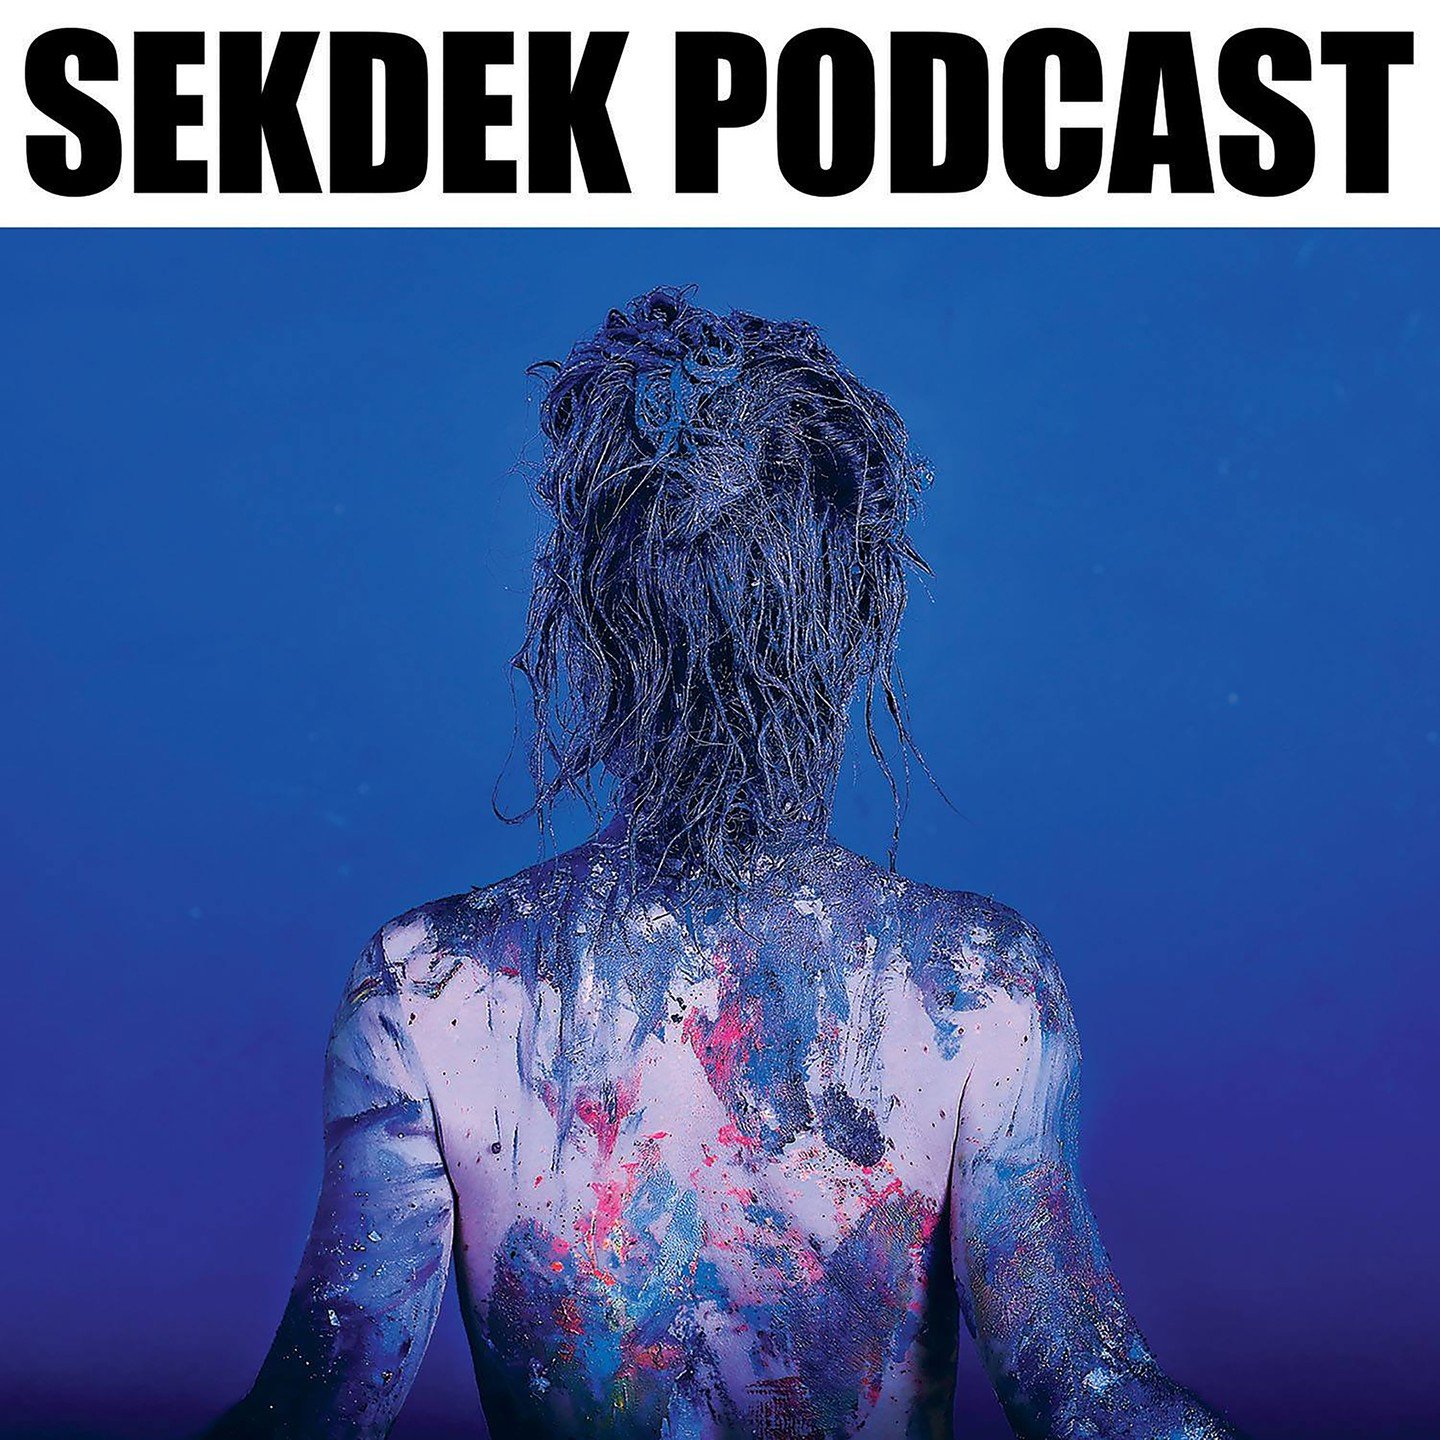 My new weekly podcast is now available on Apple Podcasts. 

The Sekdek Podcast offers a distinctive blend of elements - from raw field recordings and intimate, unscripted moments to thoughtful songs and discussions. This multimedia journey captures t